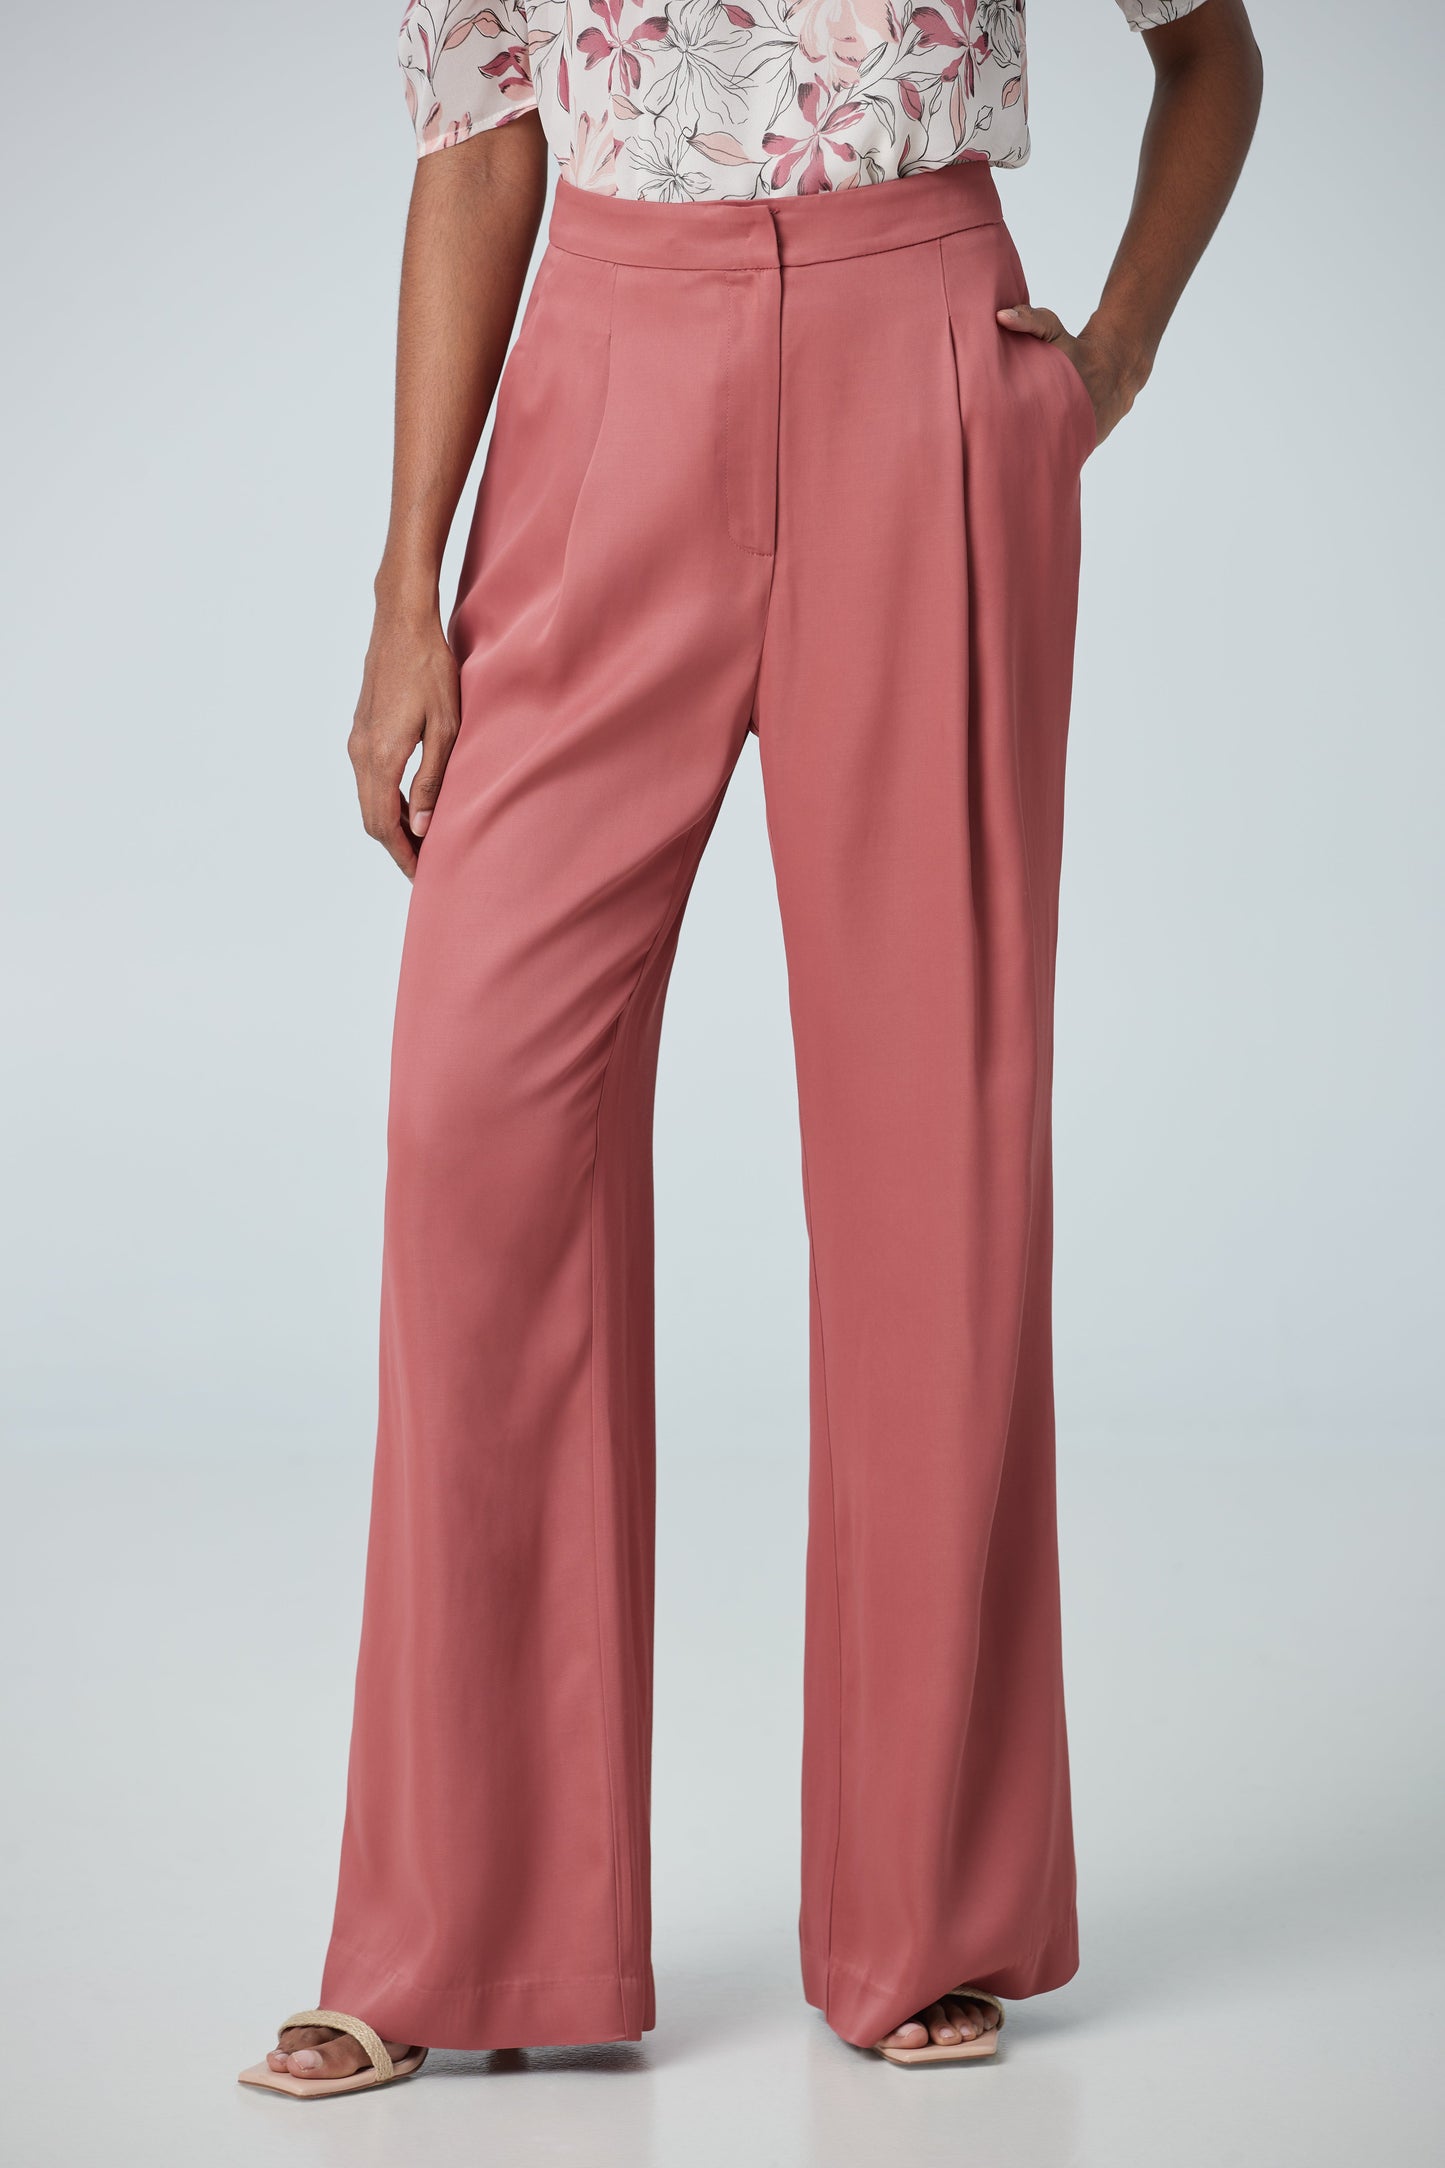 High waist pant with front pleats